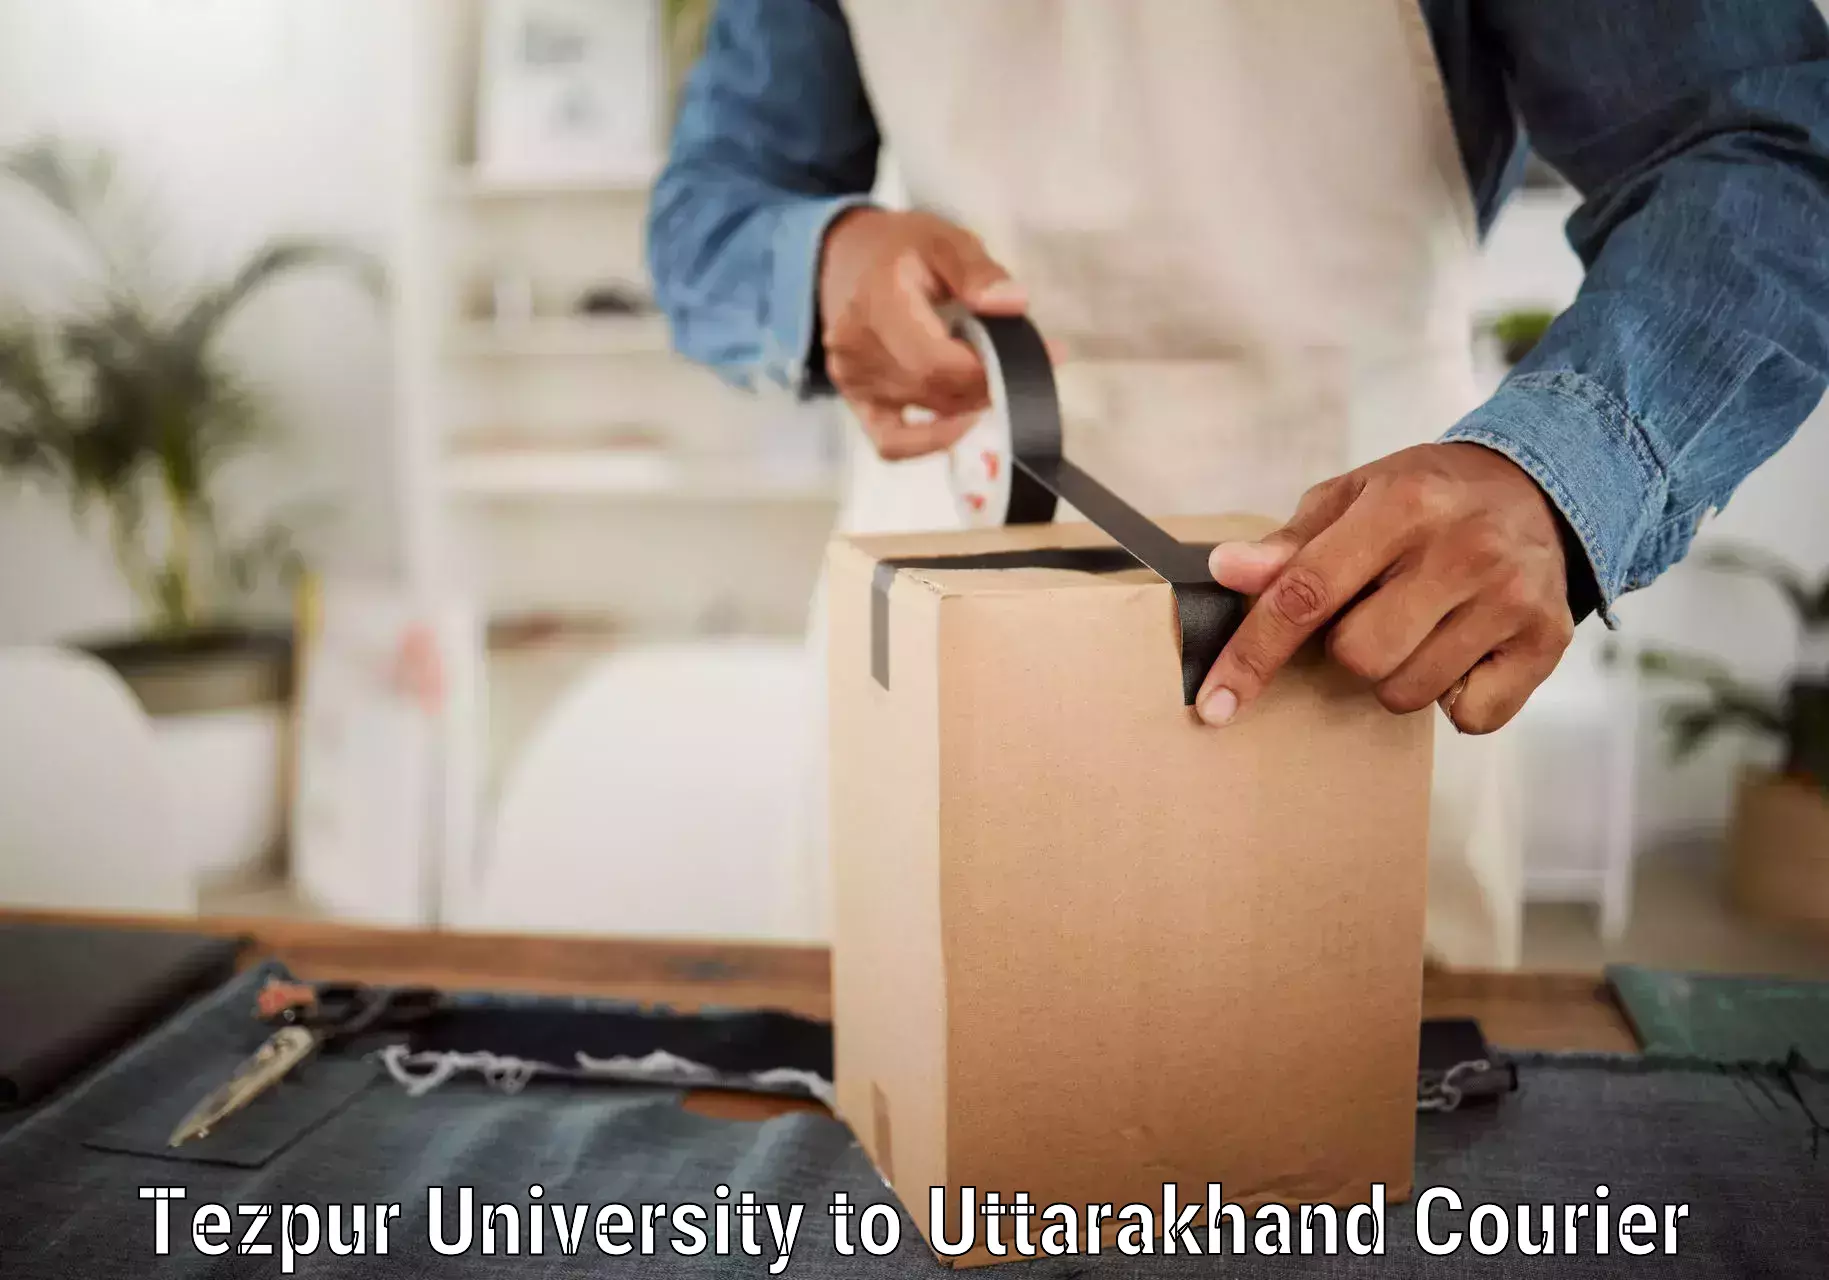 Global shipping networks Tezpur University to Roorkee